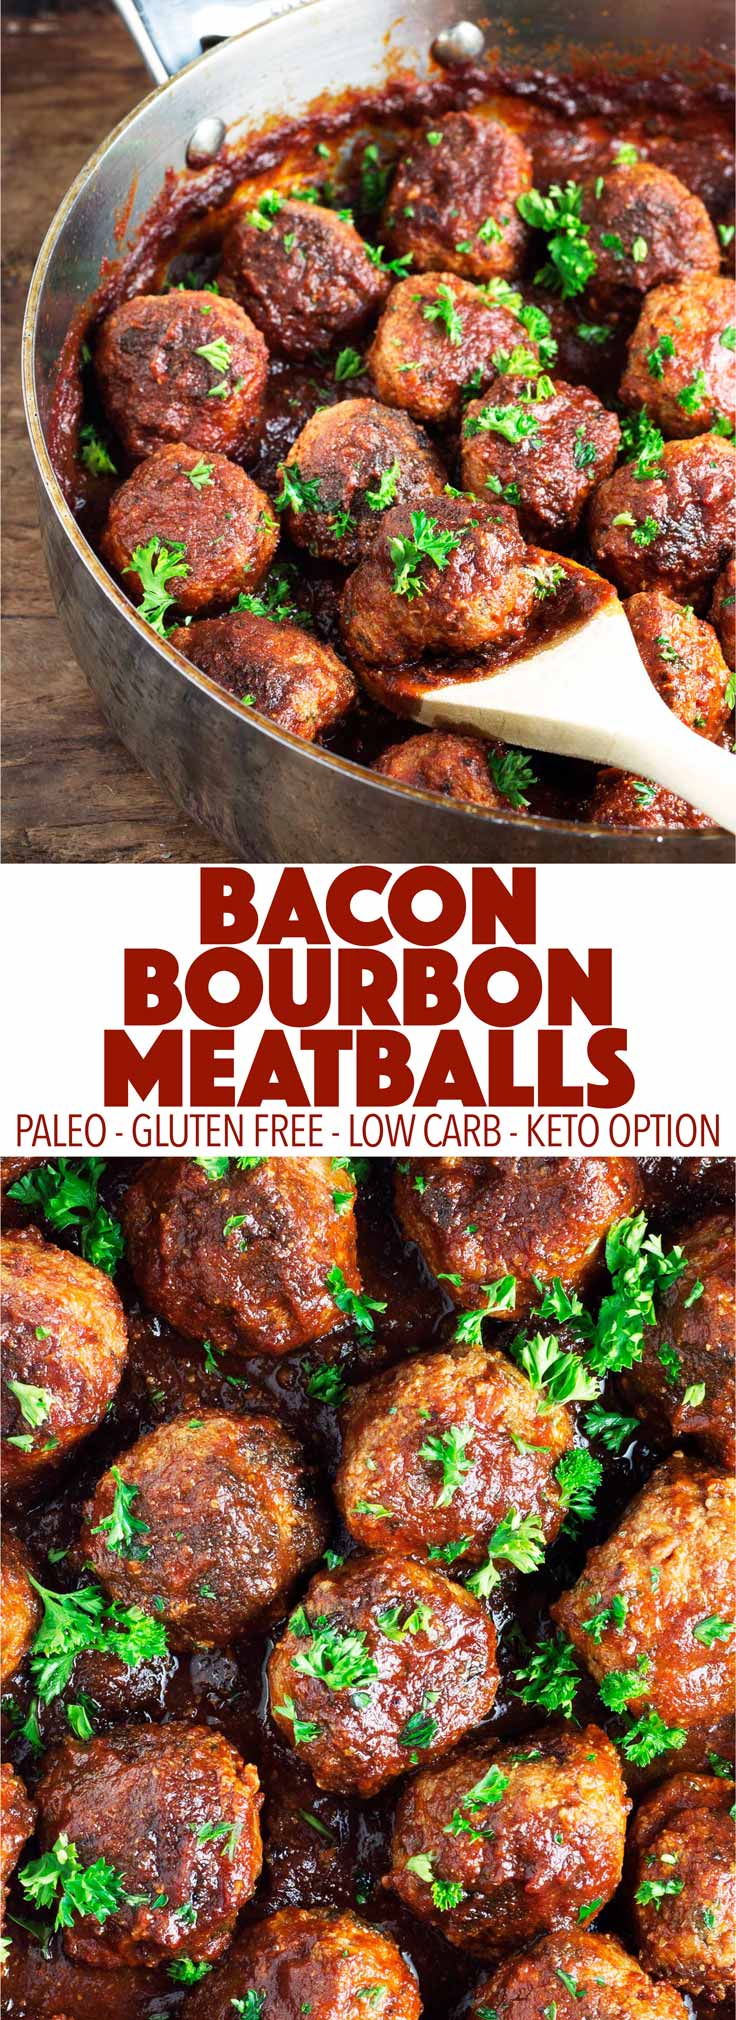 Perfect as a game day appetizer or for dinner! These bacon bourbon meatballs are easy to make and full of flavor. They are paleo, gluten free, dairy free, low carb, and can be made keto!